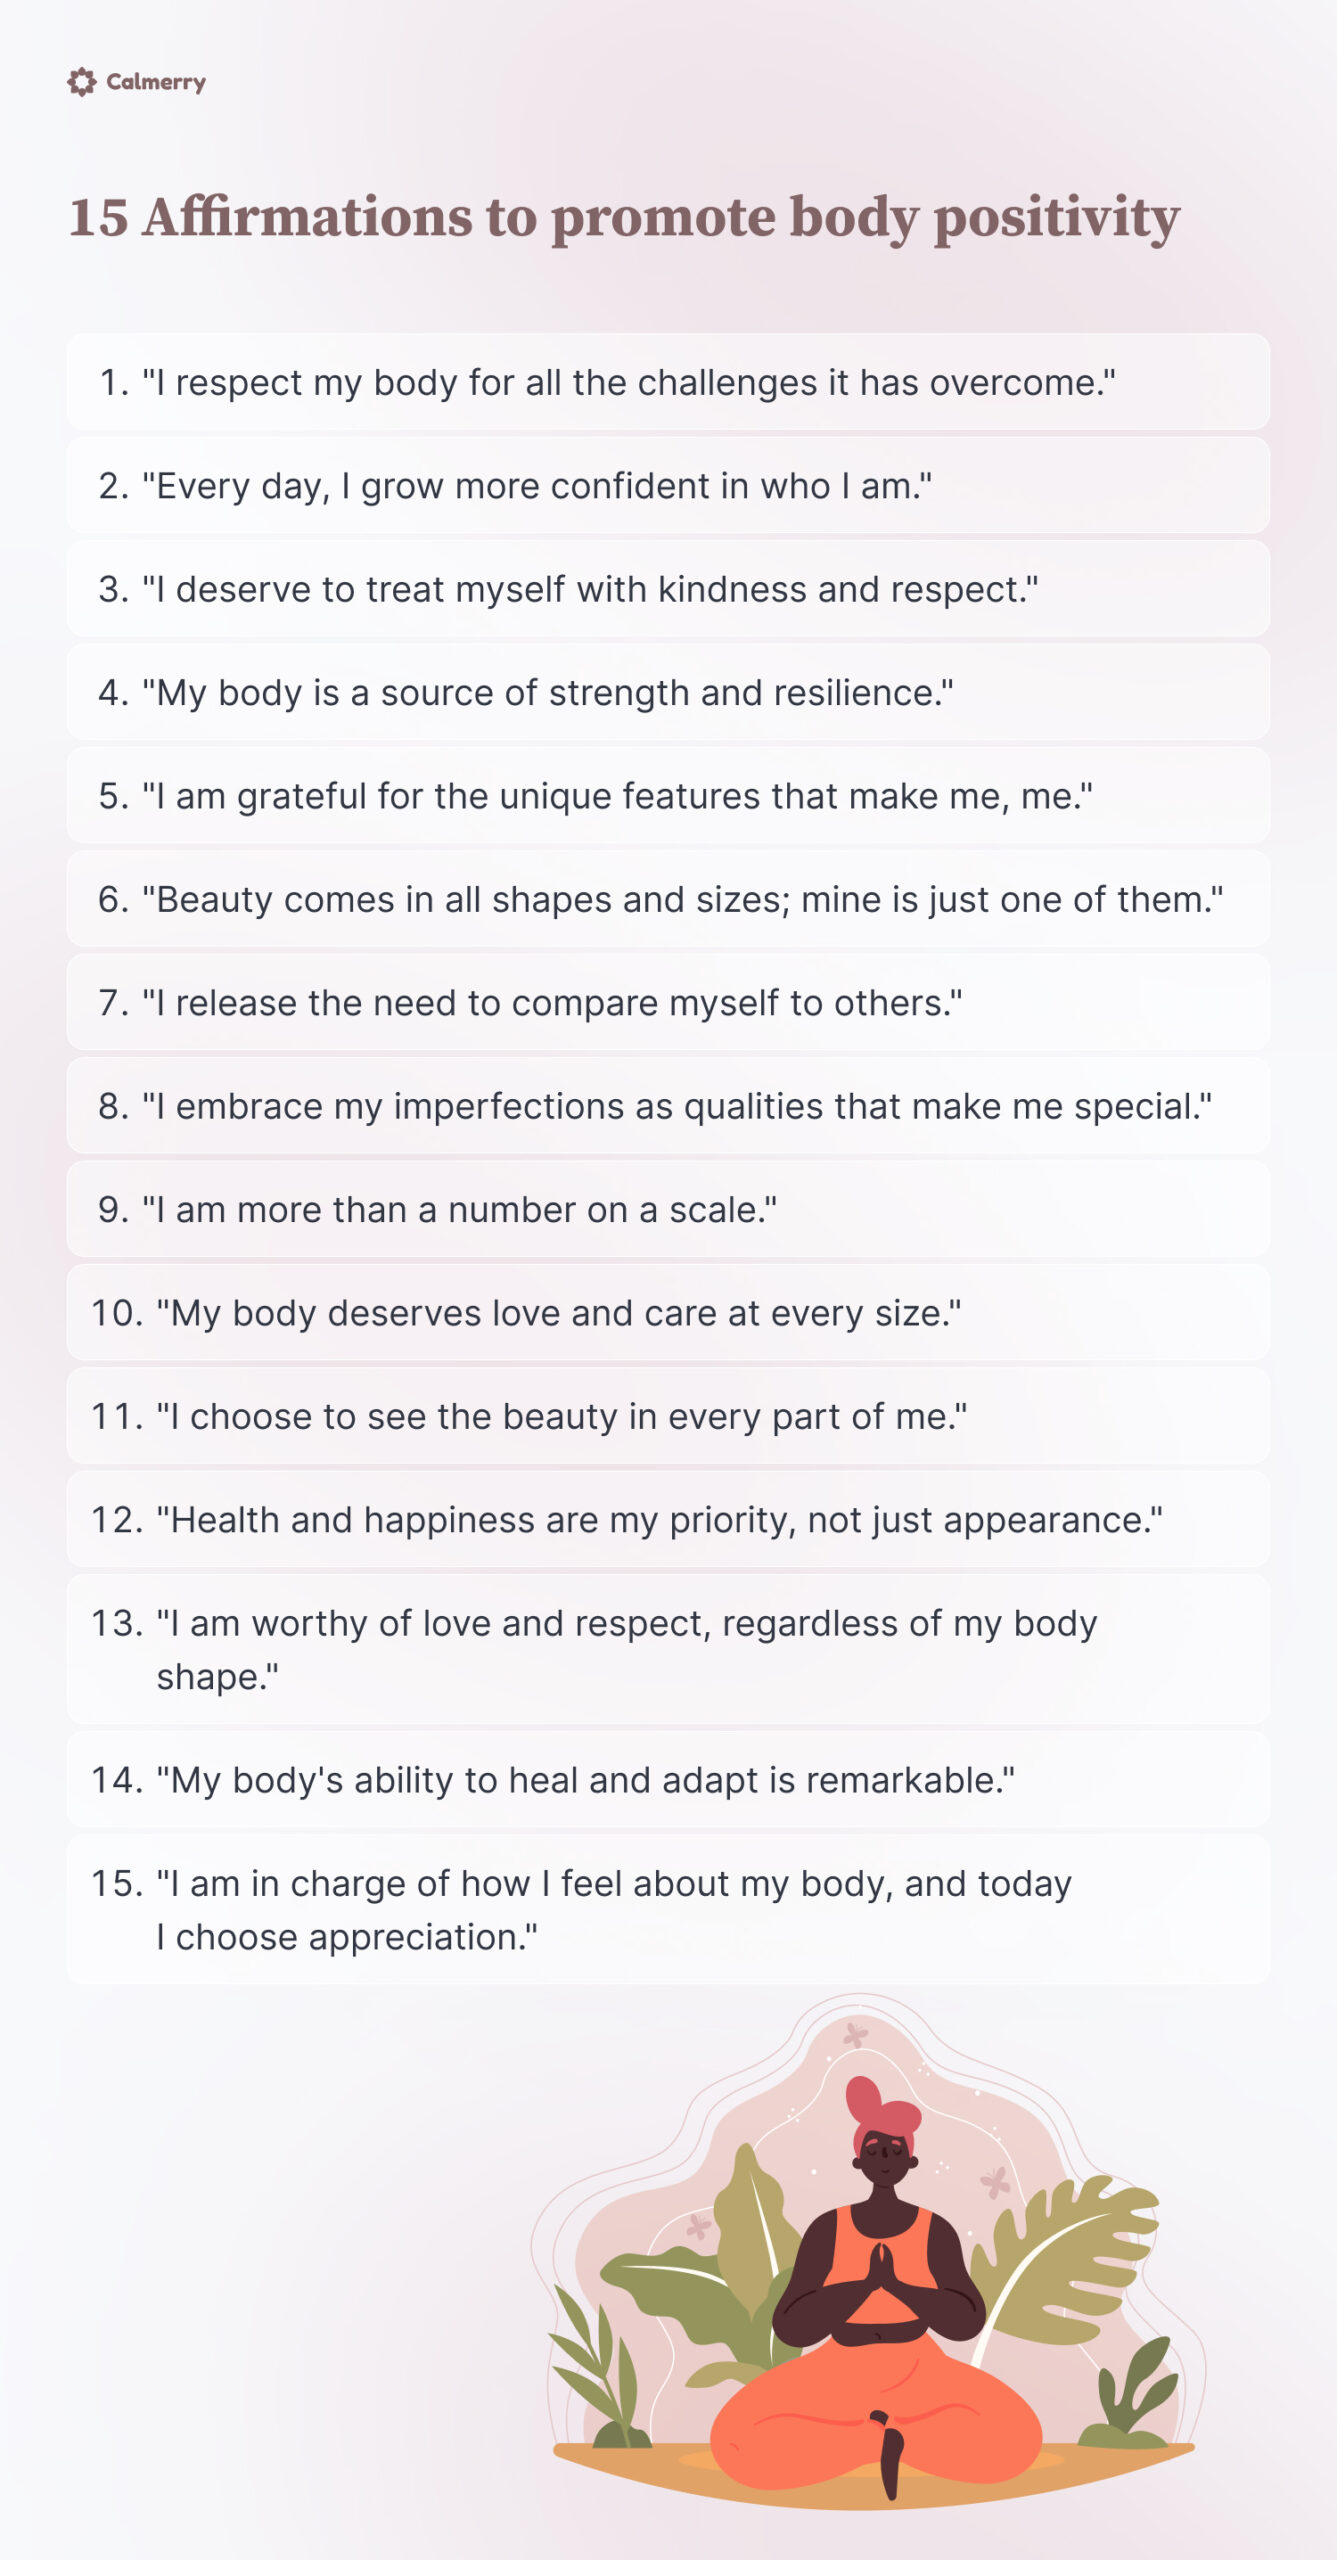 Affirmations to promote body positivity could include:
"I respect my body for all the challenges it has overcome."
"Every day, I grow more confident in who I am."
"I deserve to treat myself with kindness and respect."
"My body is a source of strength and resilience."
"I am grateful for the unique features that make me, me."
"Beauty comes in all shapes and sizes; mine is just one of them."
"I release the need to compare myself to others."
"I embrace my imperfections as qualities that make me special."
"I am more than a number on a scale."
"My body deserves love and care at every size."
"I choose to see the beauty in every part of me."
"Health and happiness are my priority, not just appearance."
"I am worthy of love and respect, regardless of my body shape."
"My body's ability to heal and adapt is remarkable."
"I am in charge of how I feel about my body, and today I choose appreciation."
